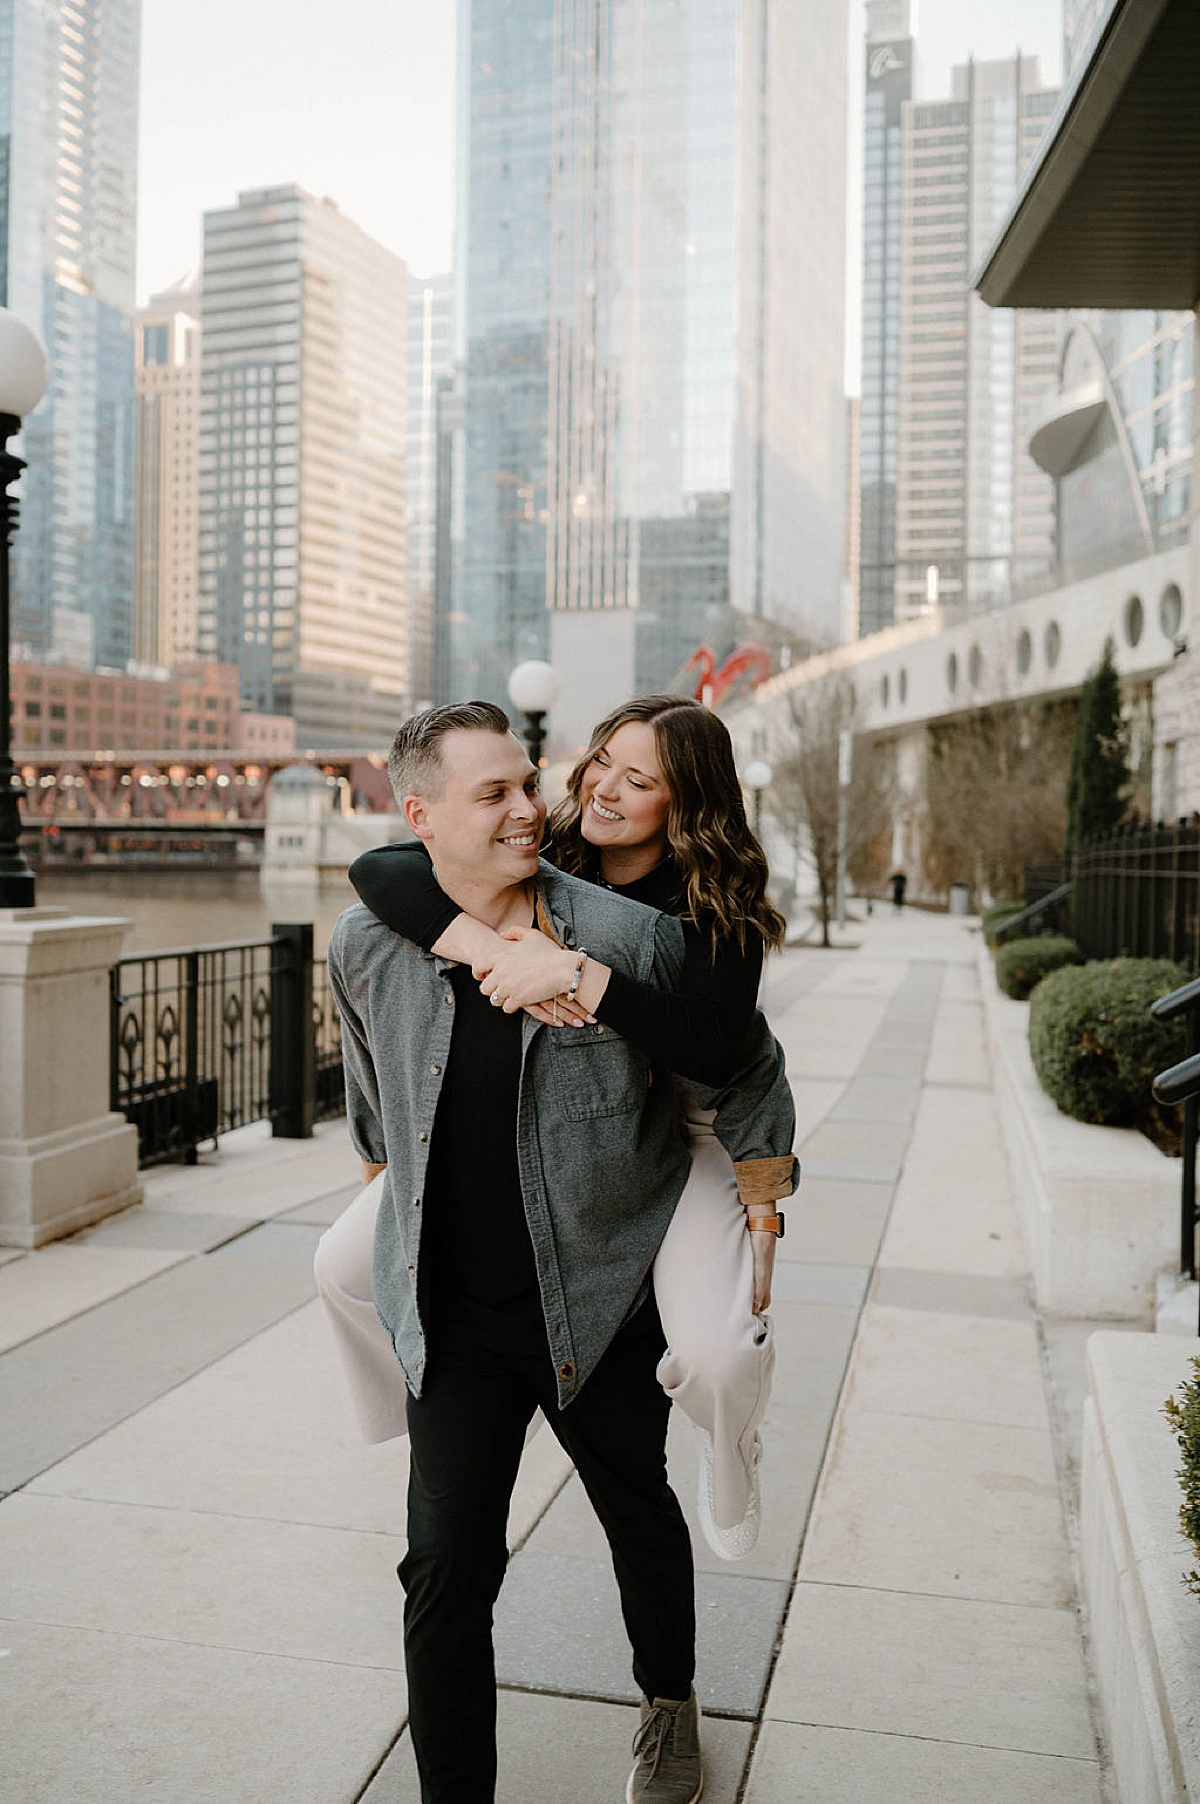 fiance carries his girl in piggyback during fun engagement shoot with chicago wedding photographer